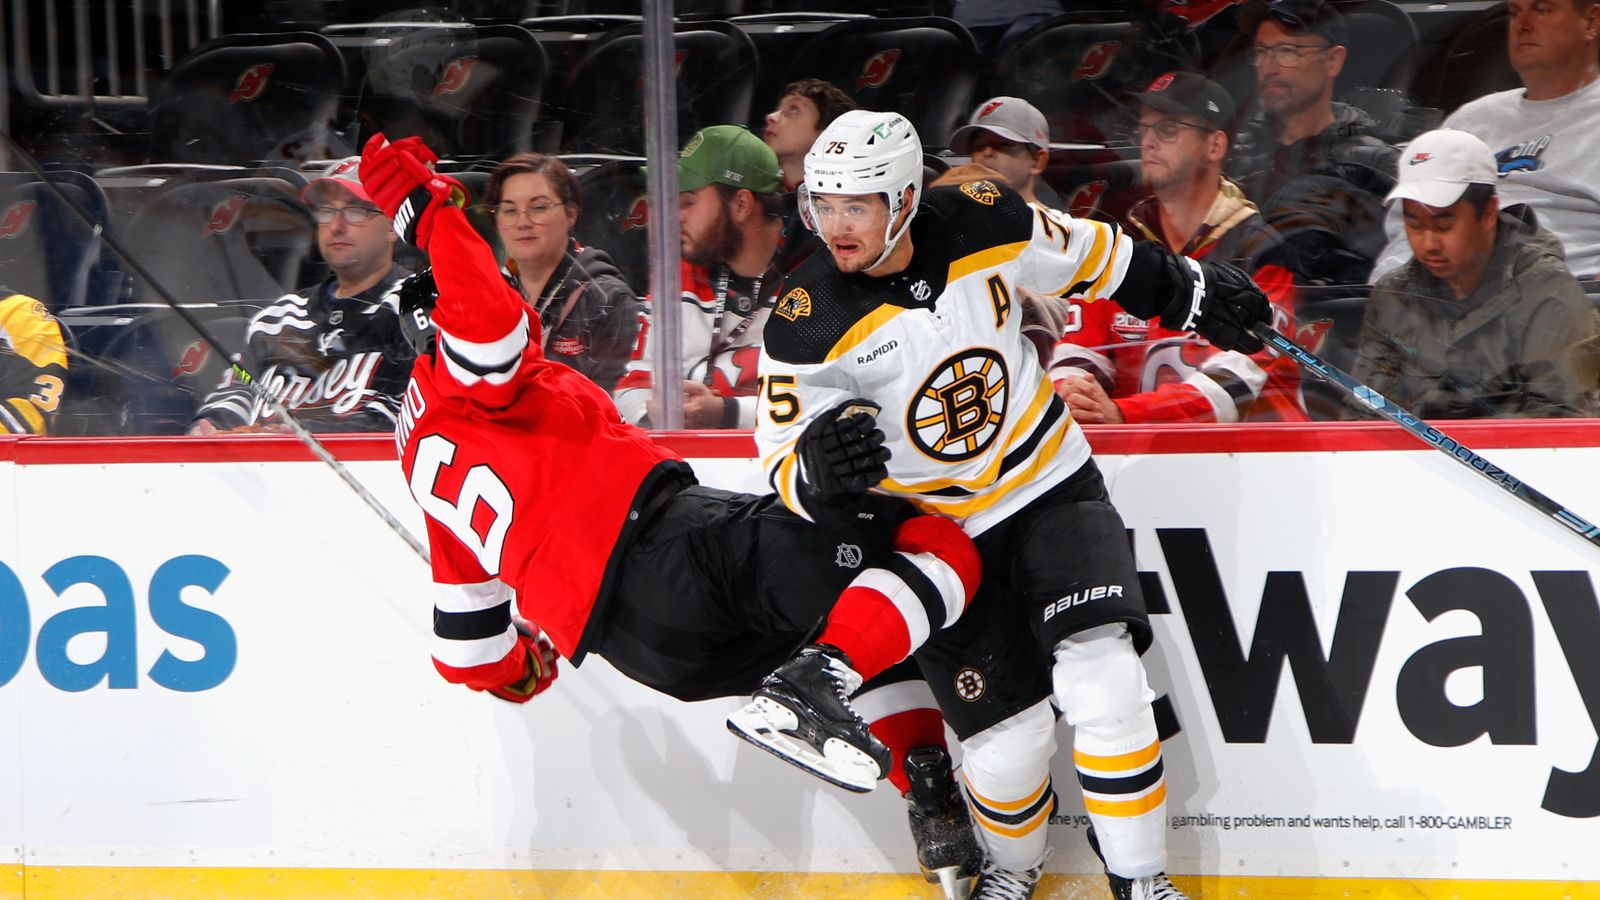 3 takeaways from the Boston Bruins' loss to the New Jersey Devils